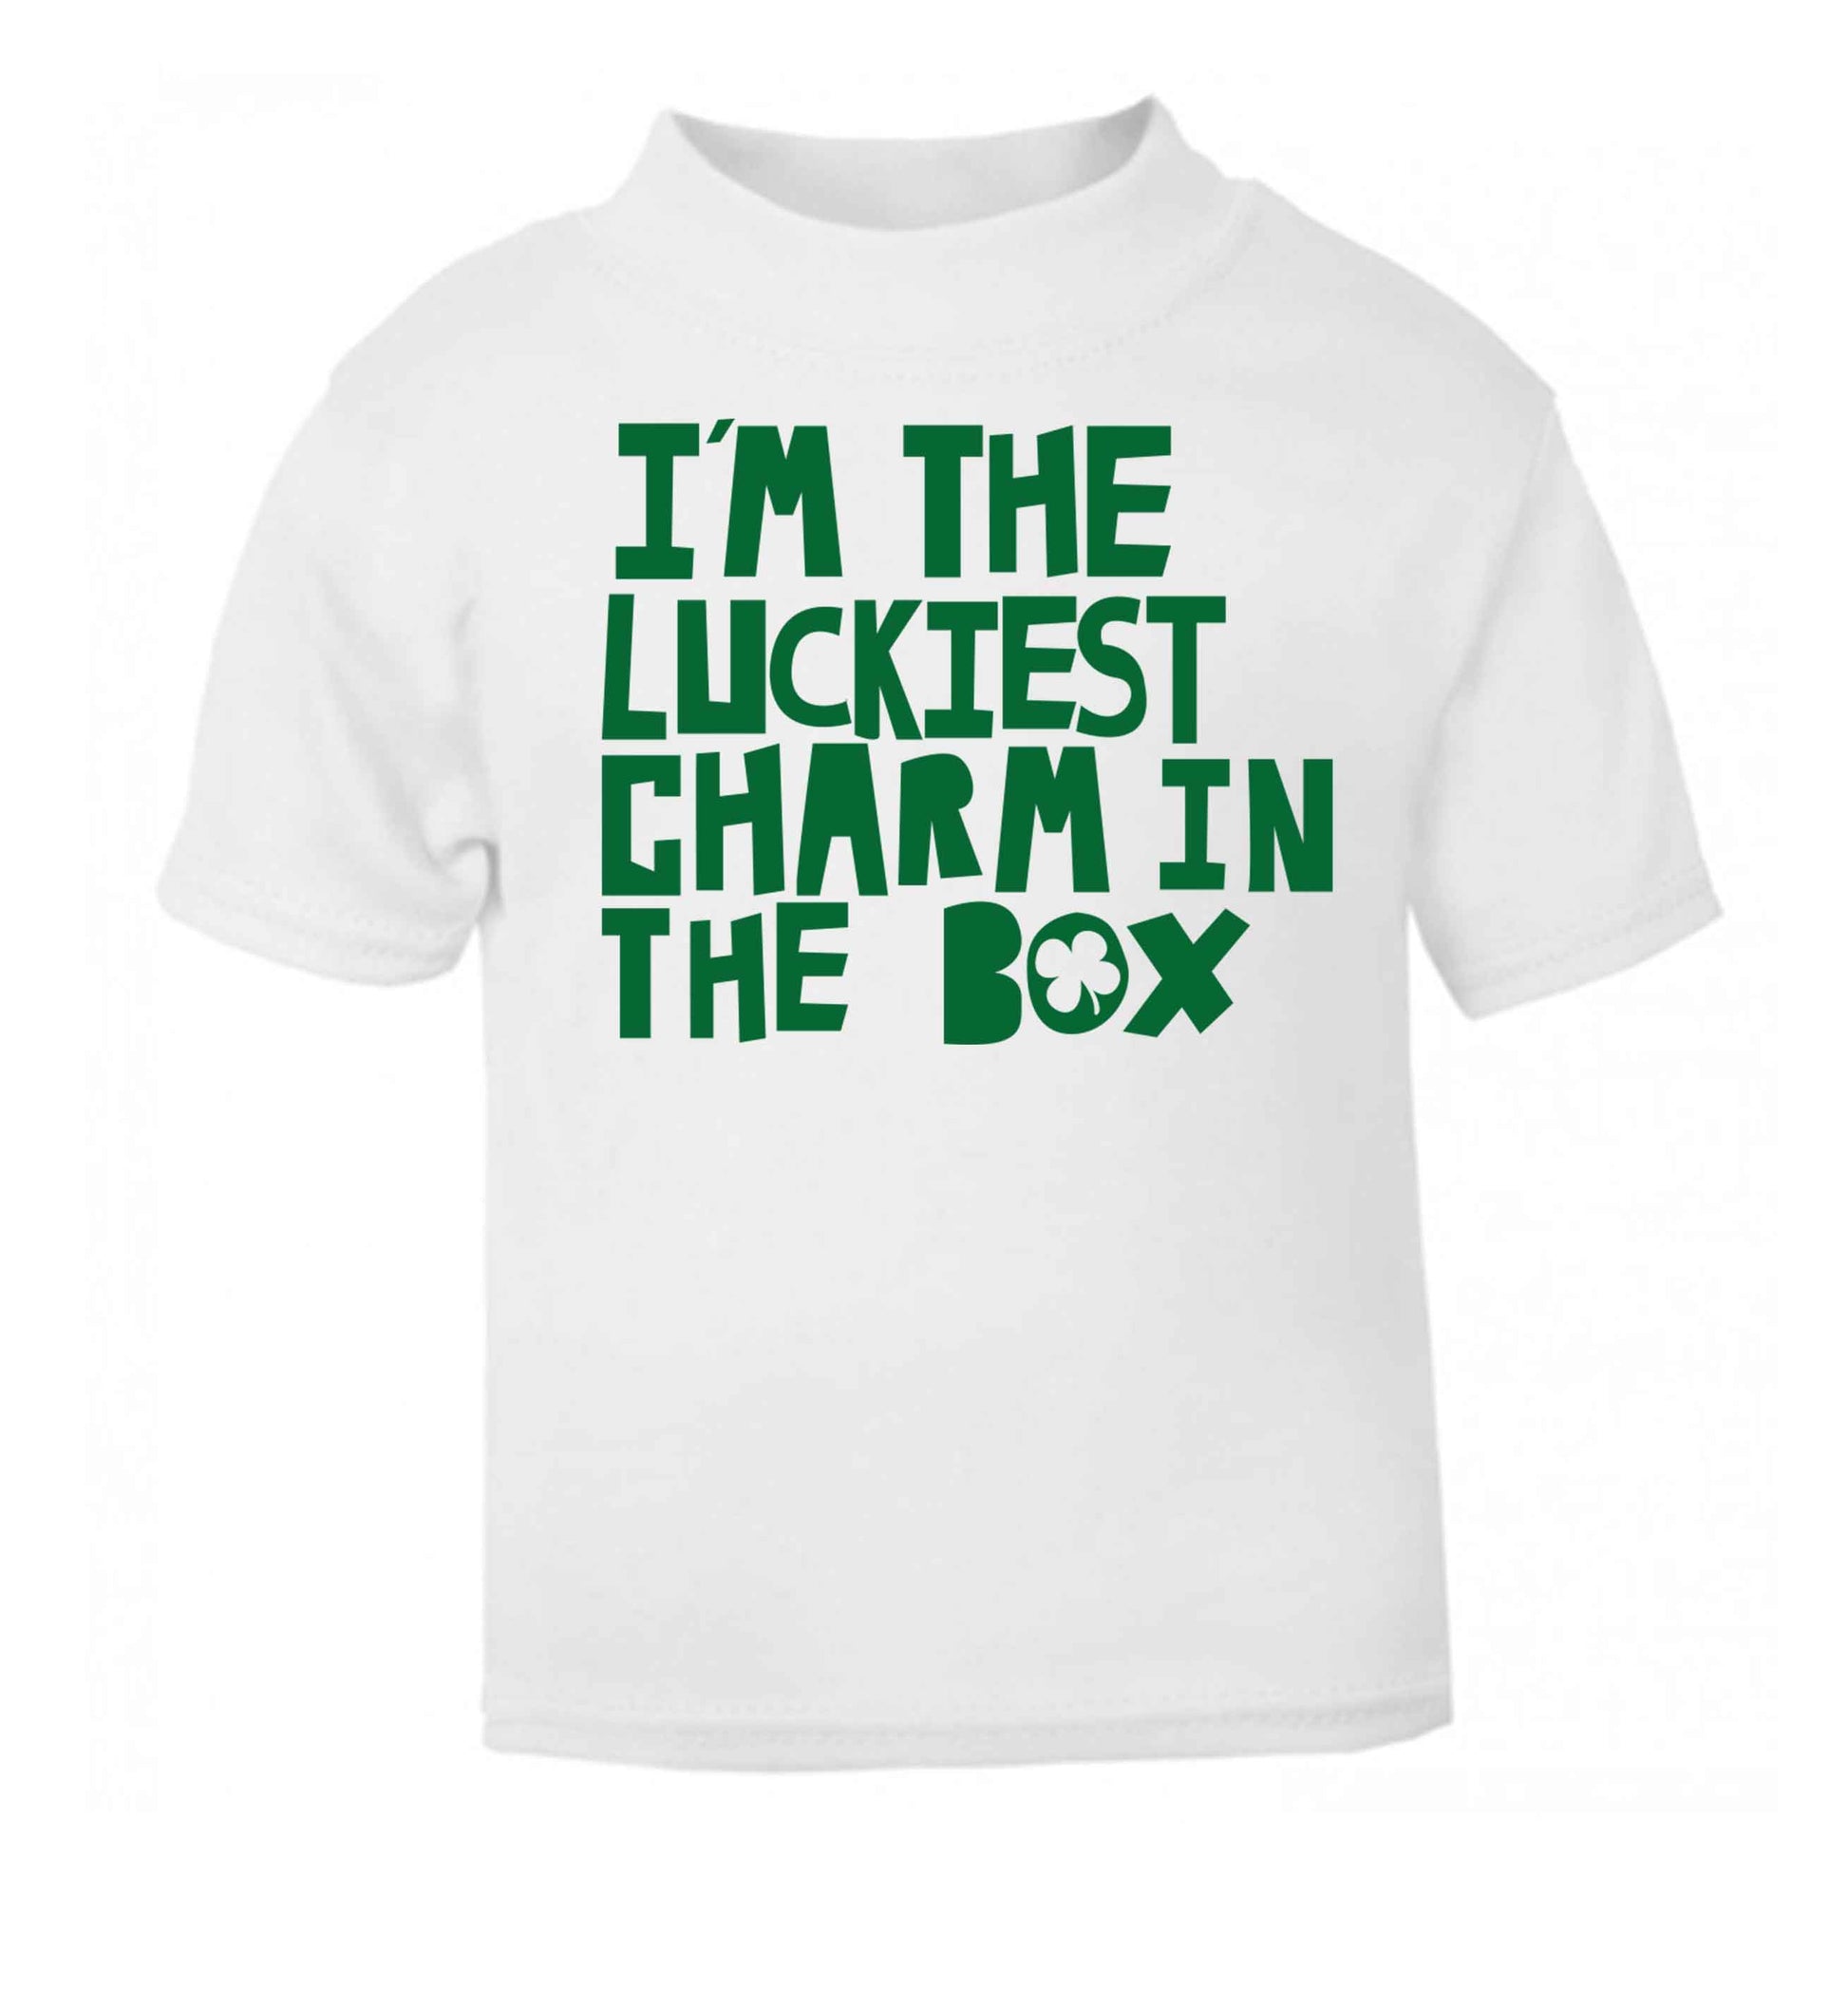 I'm the luckiest charm in the box white baby toddler Tshirt 2 Years